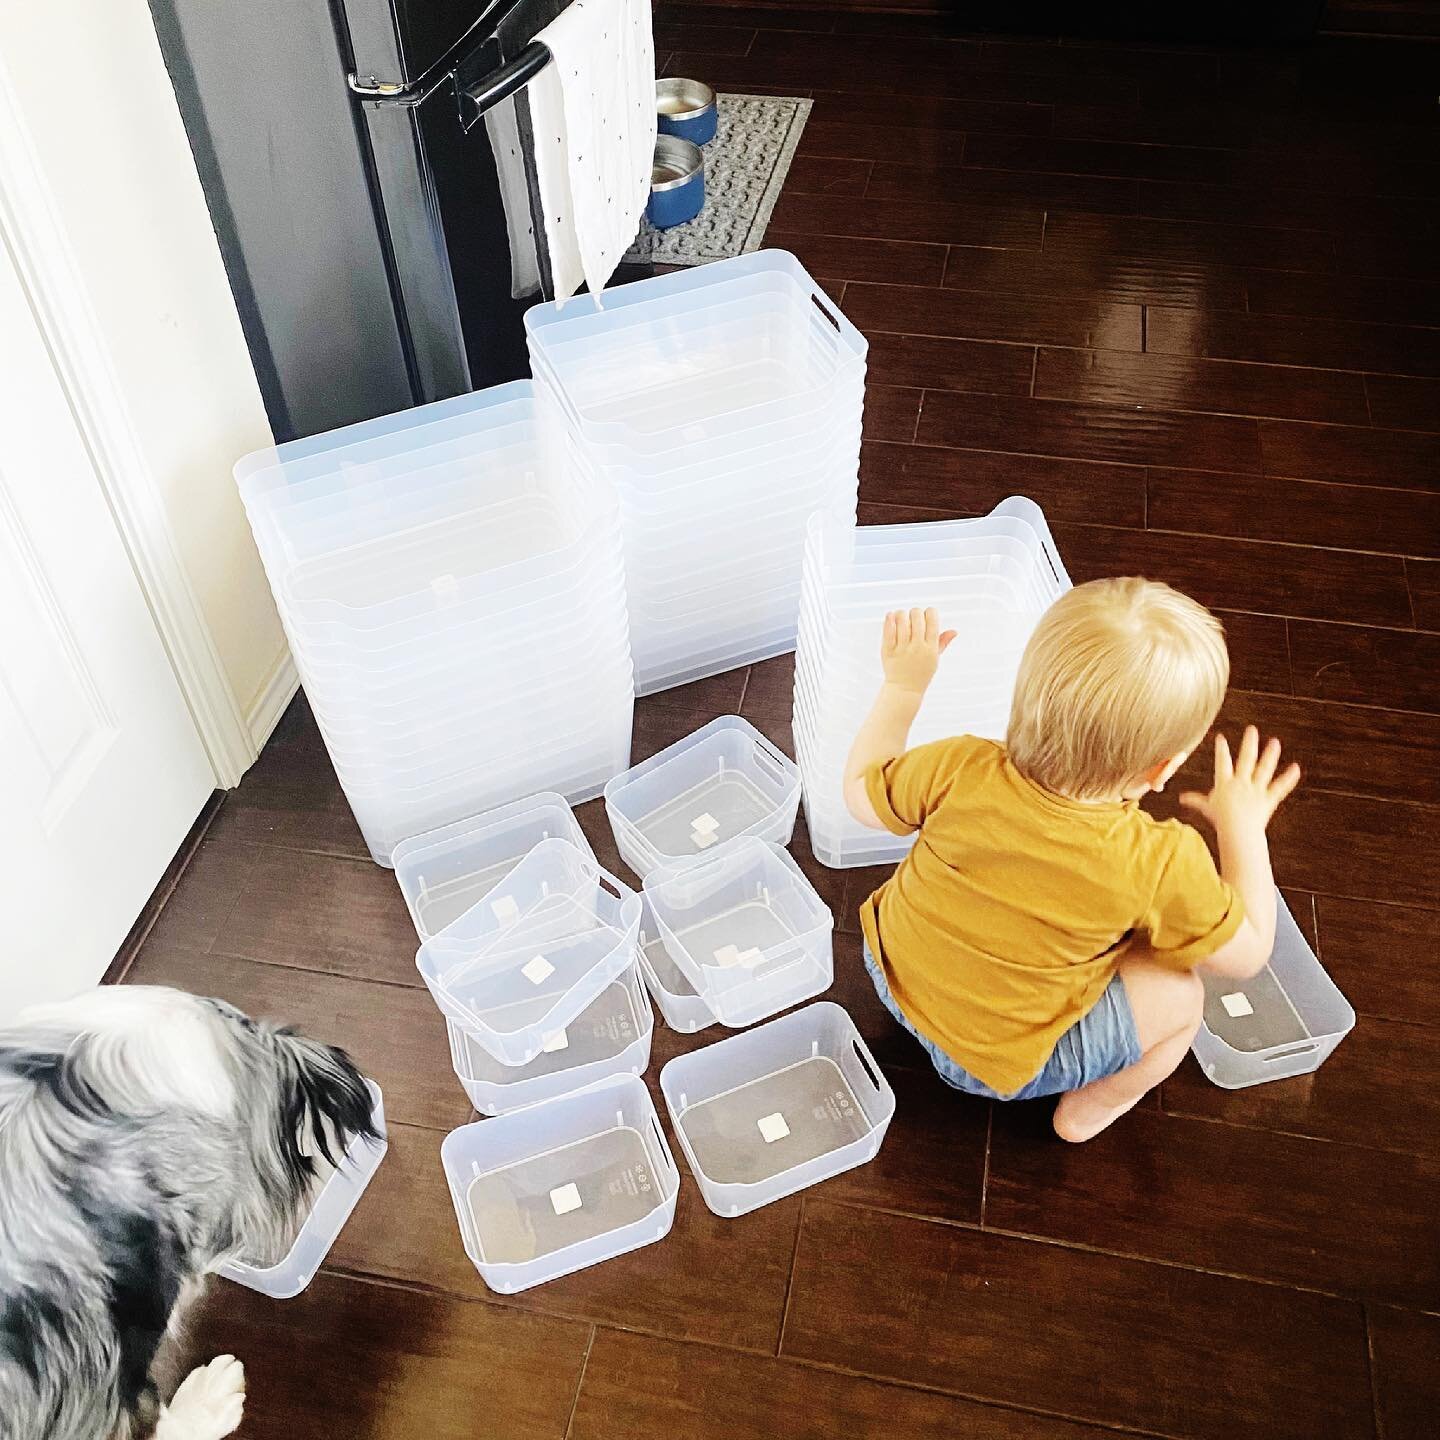 When your mom is a professional organizer and stacking cups are your favorite toys&hellip;playing with @thecontainerstore bins is your JAM! P.S. If our Italy visas get held up any longer, Uncle Blake&rsquo;s house is going to be VERY, VERY organized.